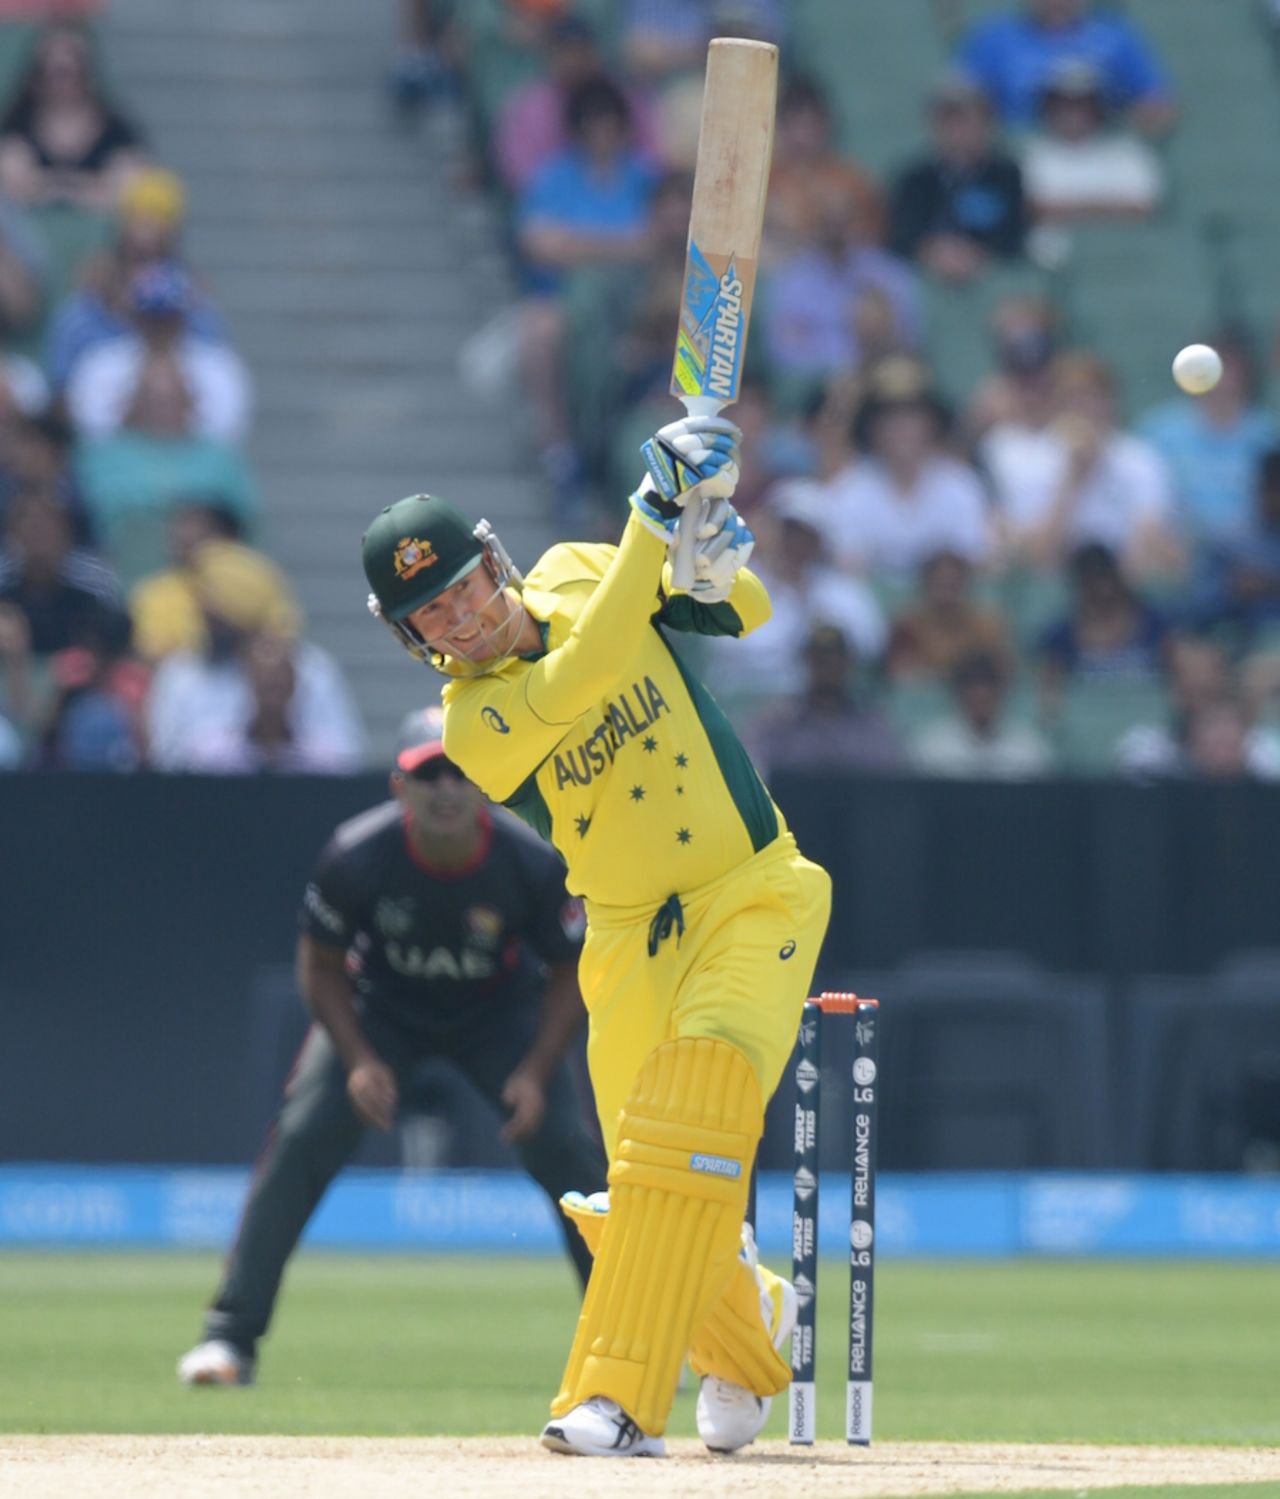 Michael Clarke hits through midwicket enroute his half-century, Australia v UAE, World Cup warm-up, Melbourne, February 11, 2015